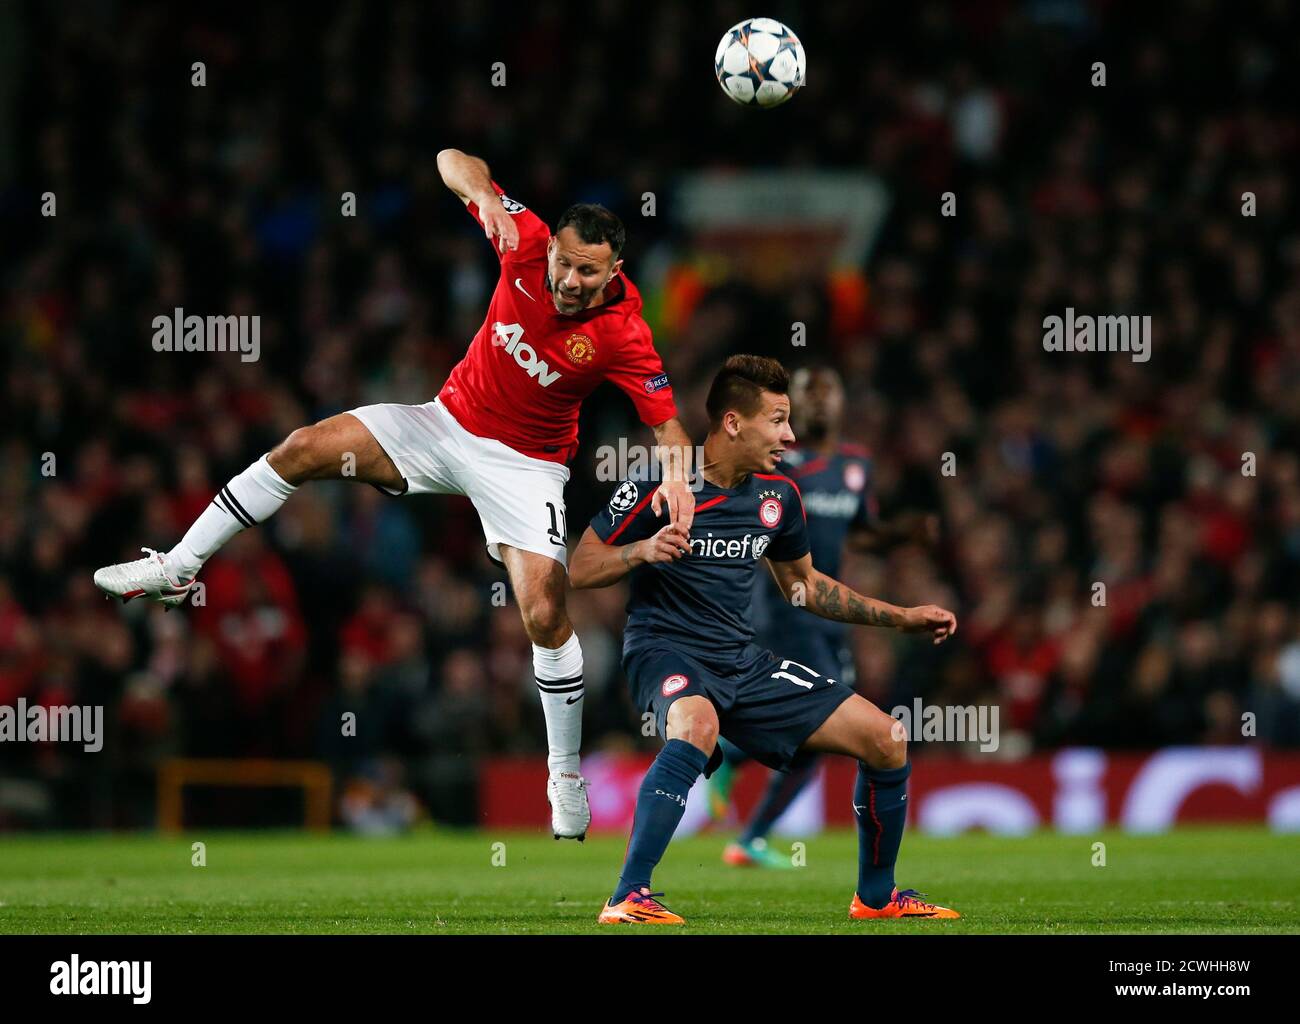 Manchester United's Ryan Giggs (L) jumps for the ball against Olympiakos'  Hernan Perez during their Champions League soccer match at Old Trafford in  Manchester, northern England, March 19, 2014. REUTERS/Phil Noble (BRITAIN -